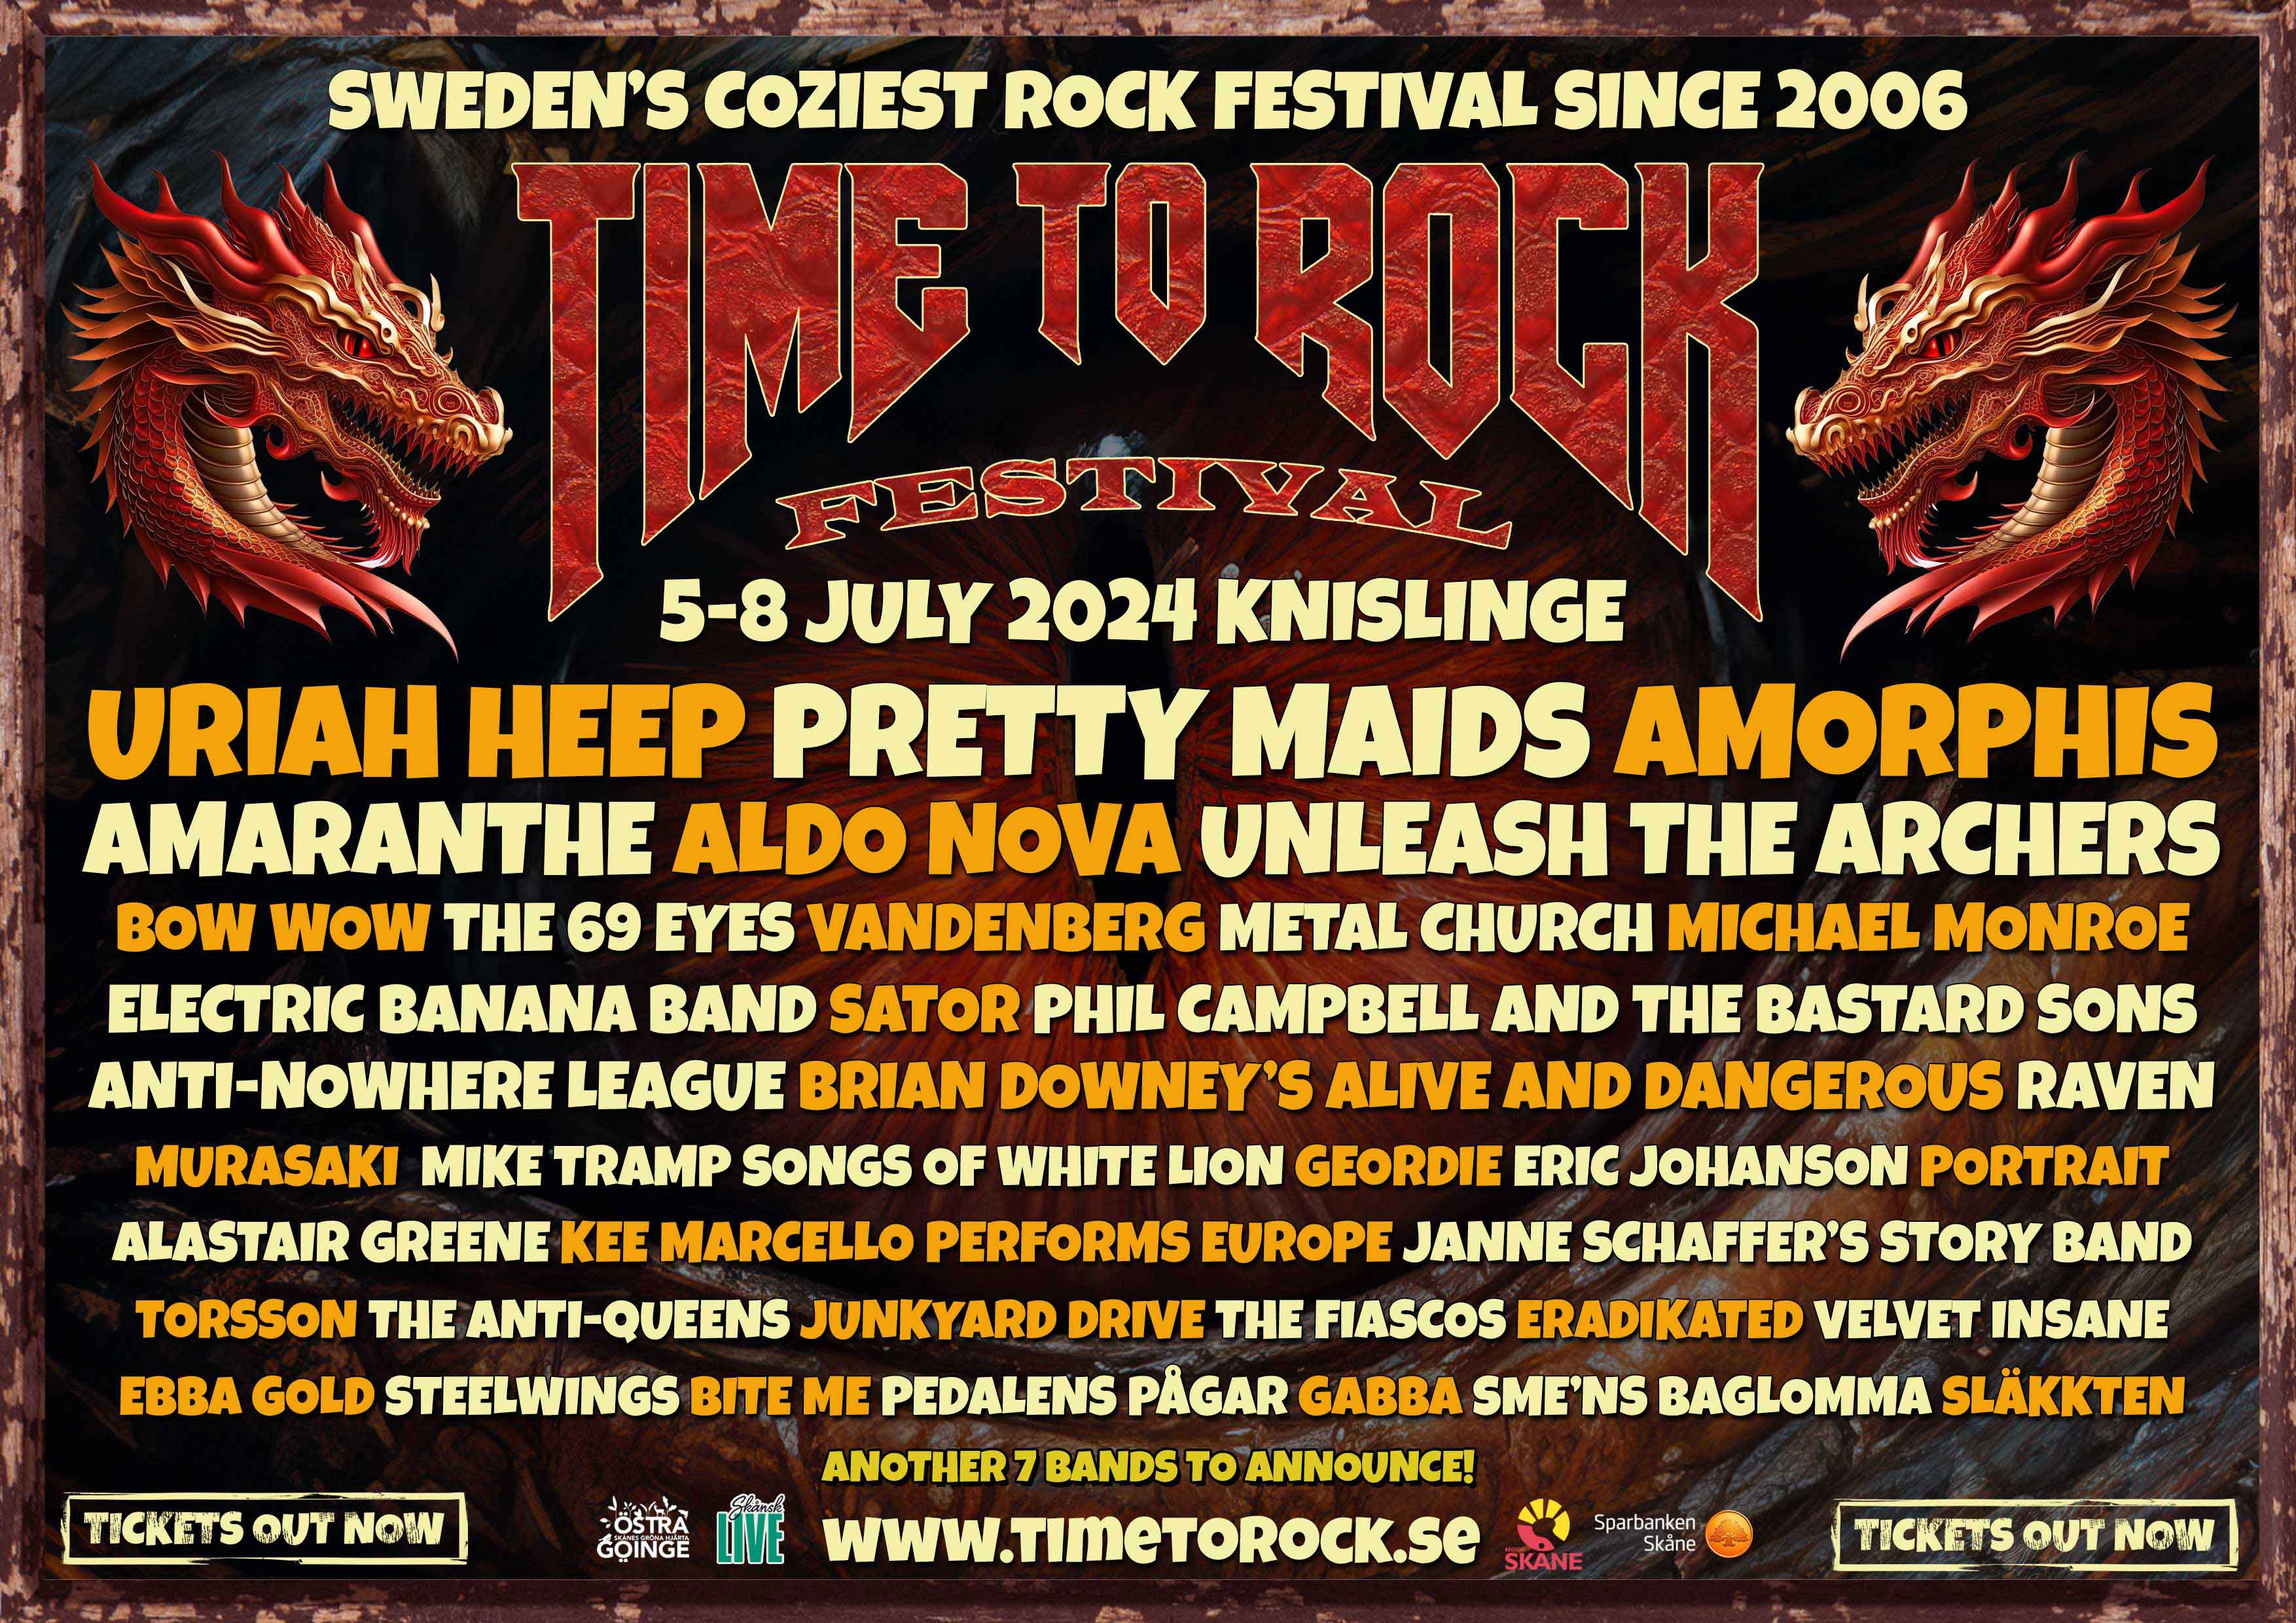 Time to rock sign with some of the bands playing at the festival.